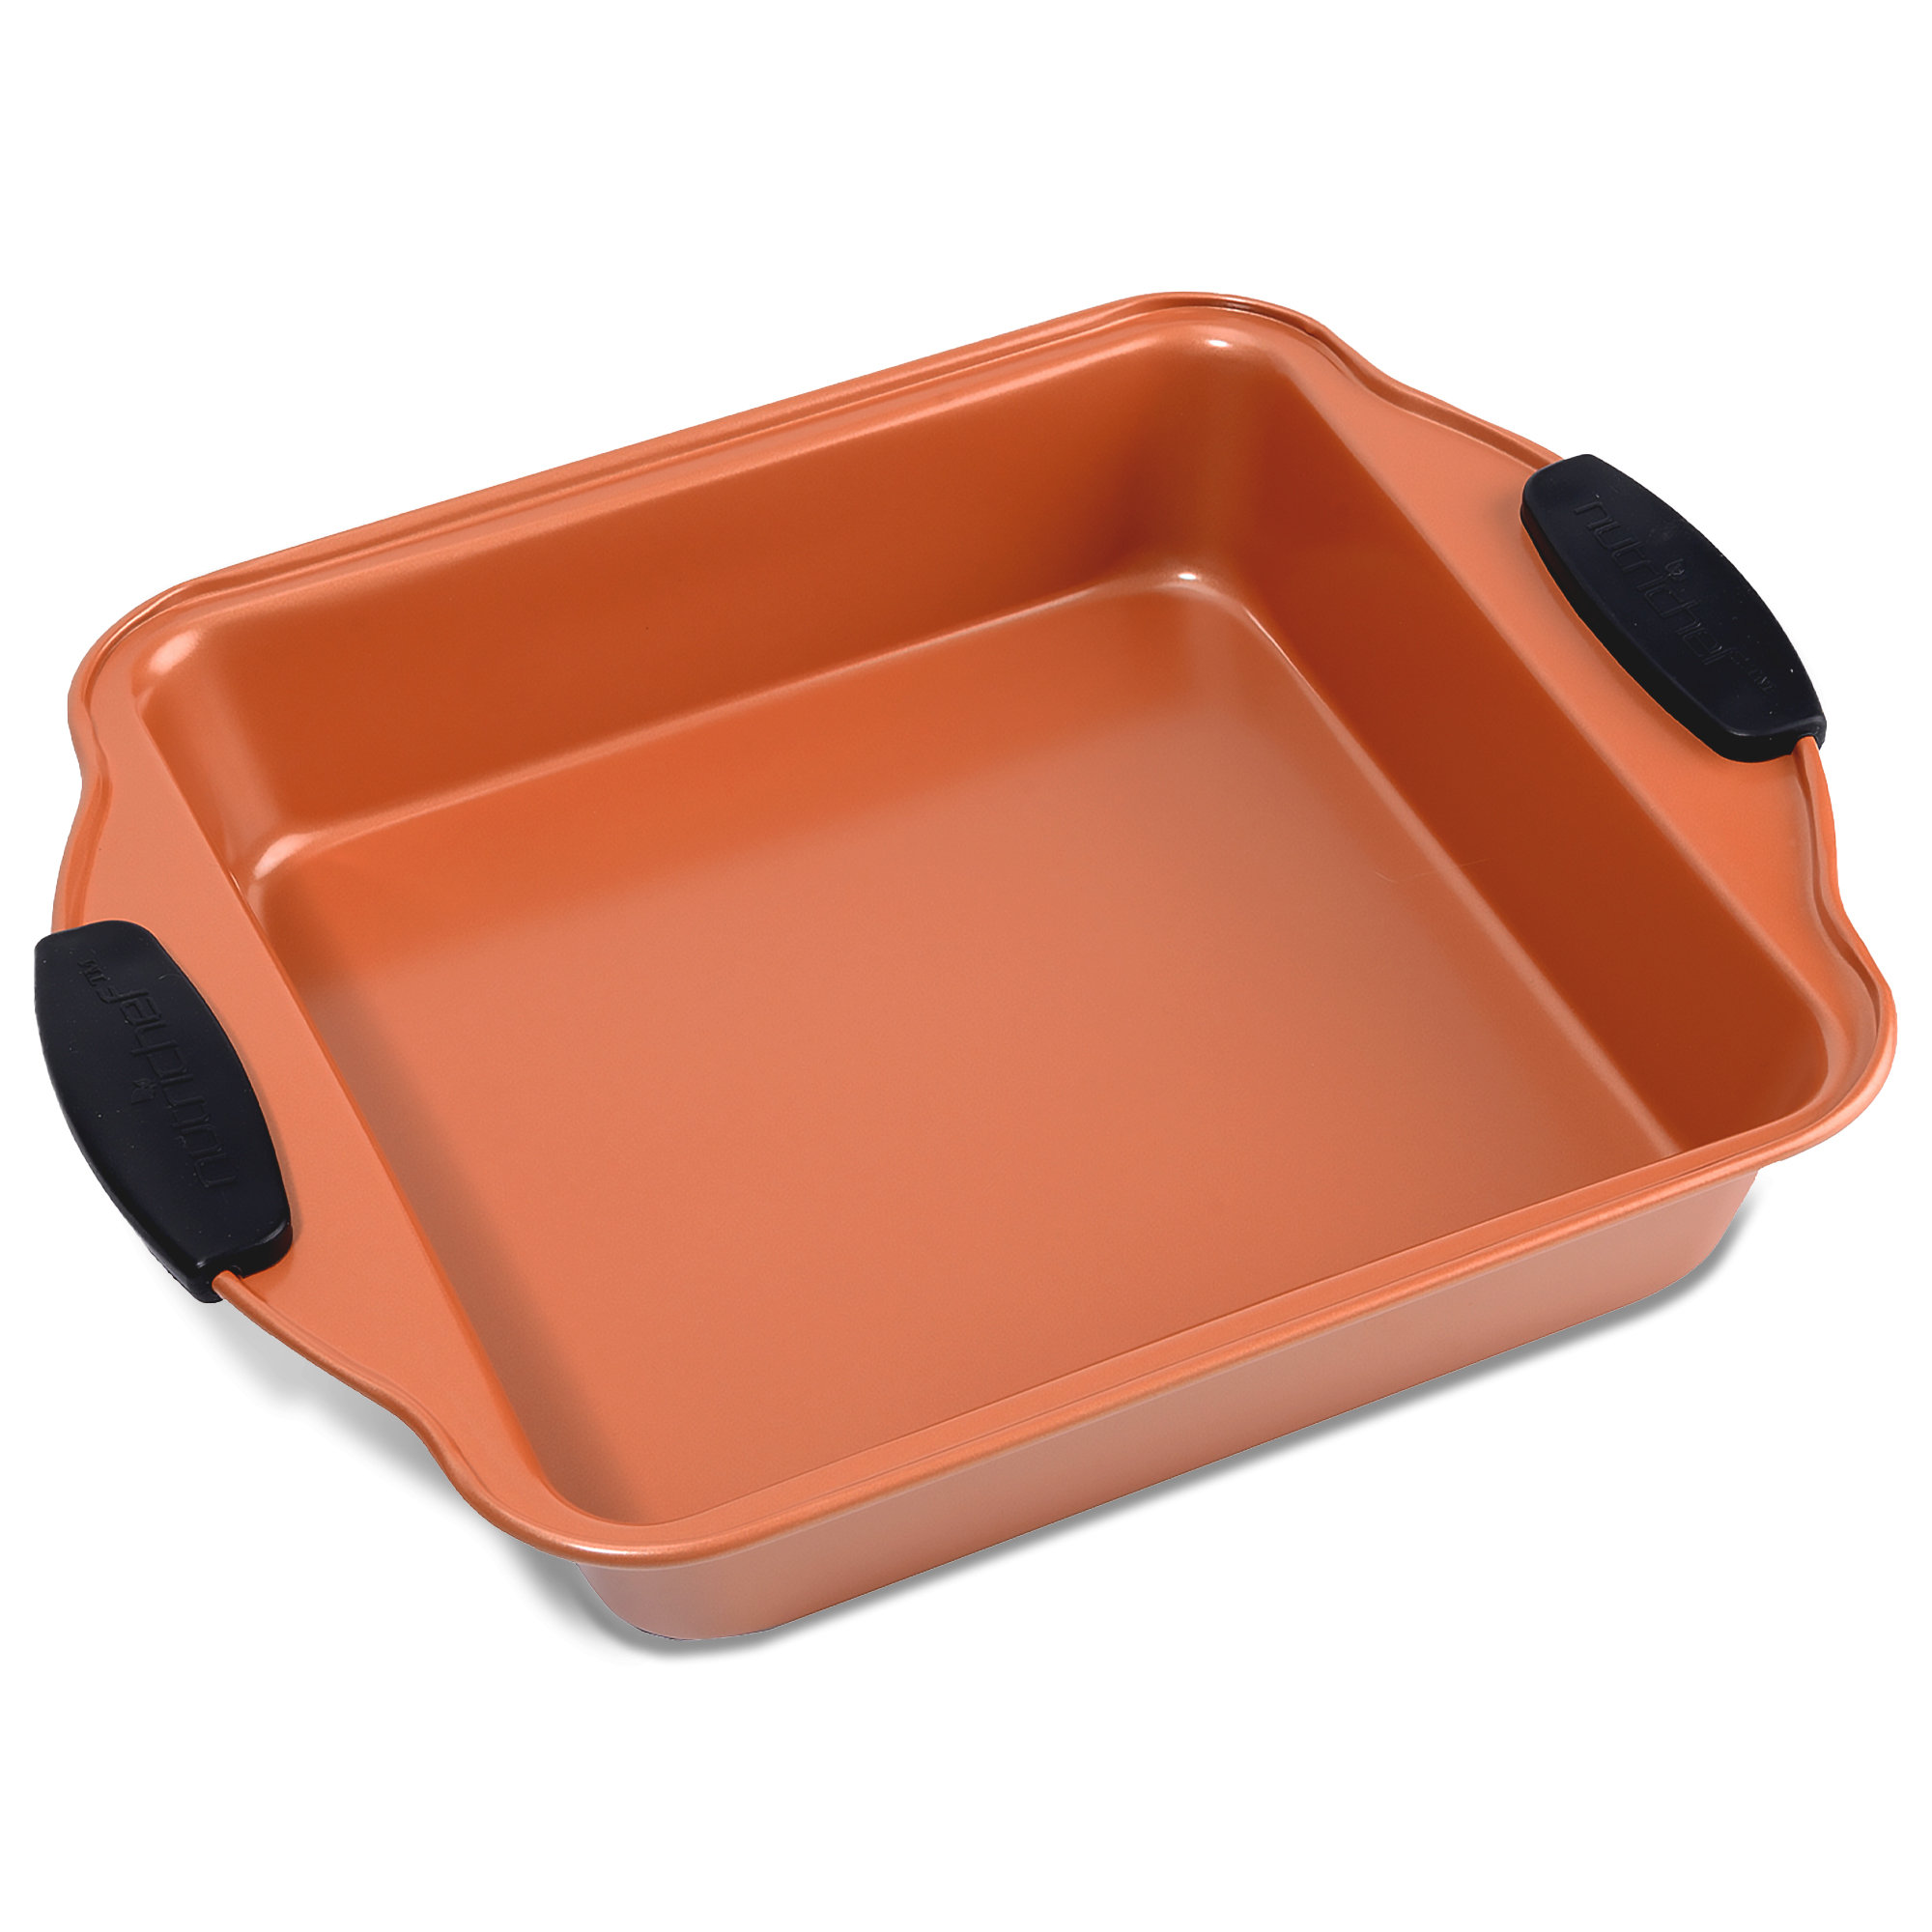 NutriChef Non-Stick Loaf Pan - Deluxe Nonstick Gray Coating Inside and  Outside with Red Silicone Handles